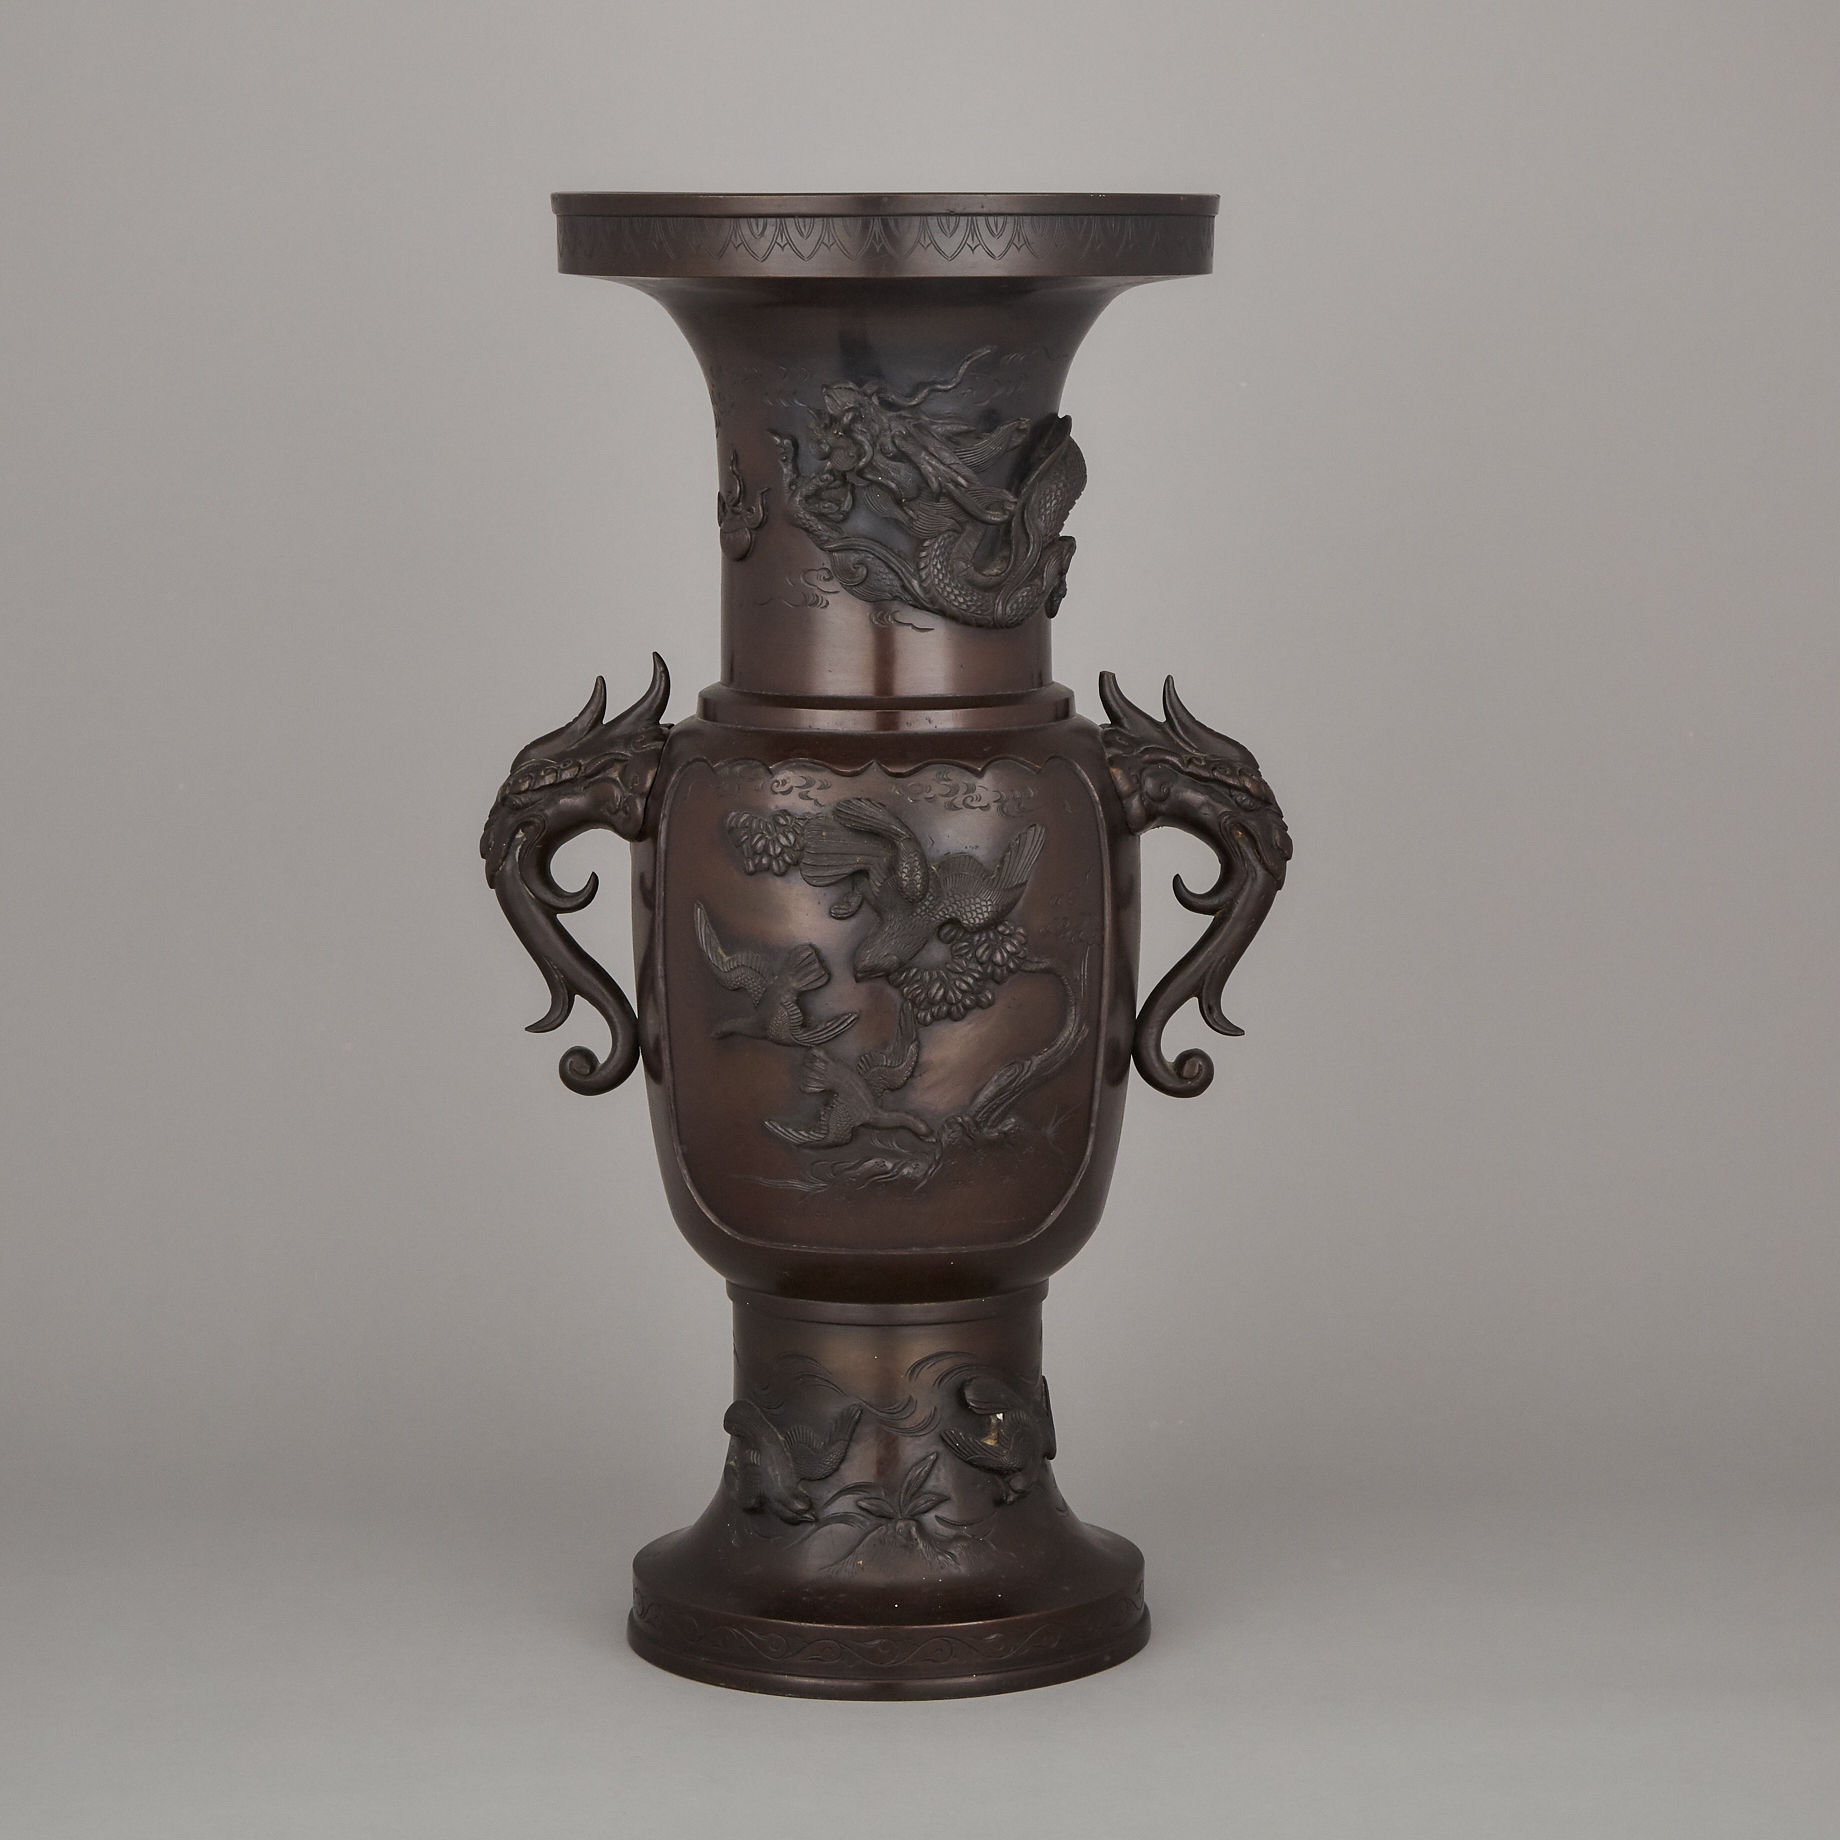 A Large Japanese Bronze Relief Vase, Meiji Period